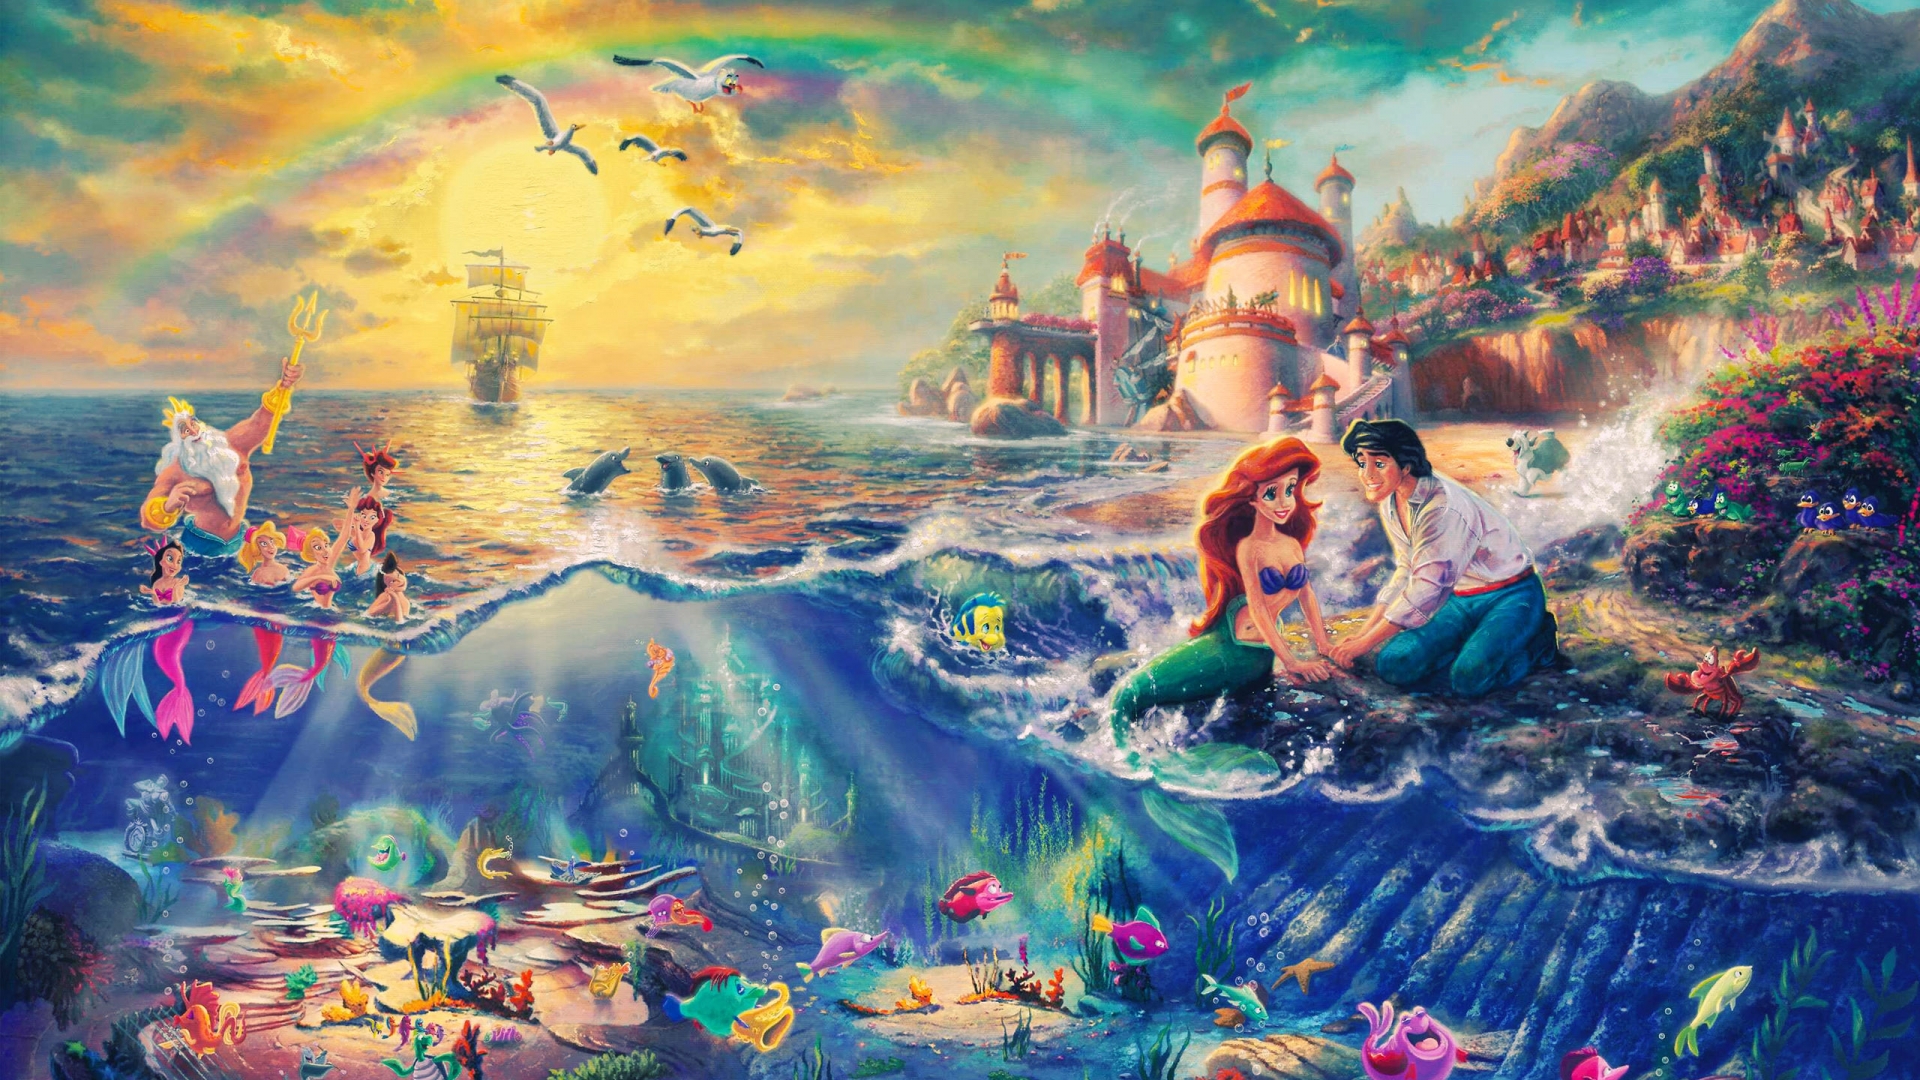 Amazing Picture. Ariel 100% Quality HD Wallpaper